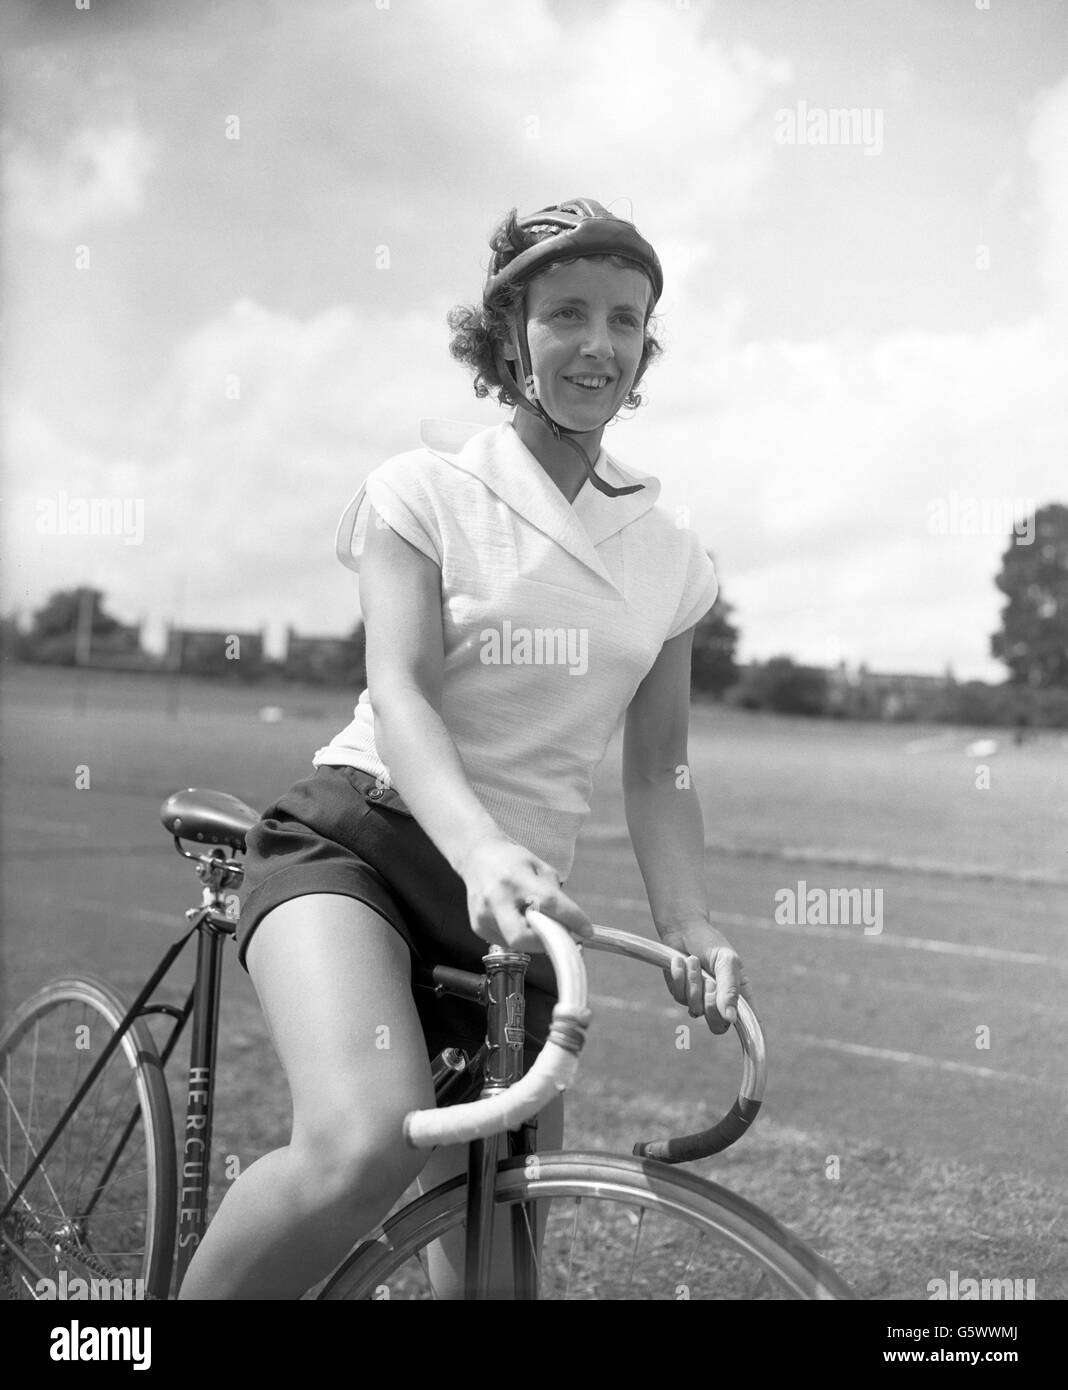 Training at Herne Hill cycle track in London is Eileen Sheridan, of Coventry, who is to make an attempt on the existing one-hour track record on Wednesday. She is considered one of the world's greatest all-round female cyclists and is holder of many records. Stock Photo